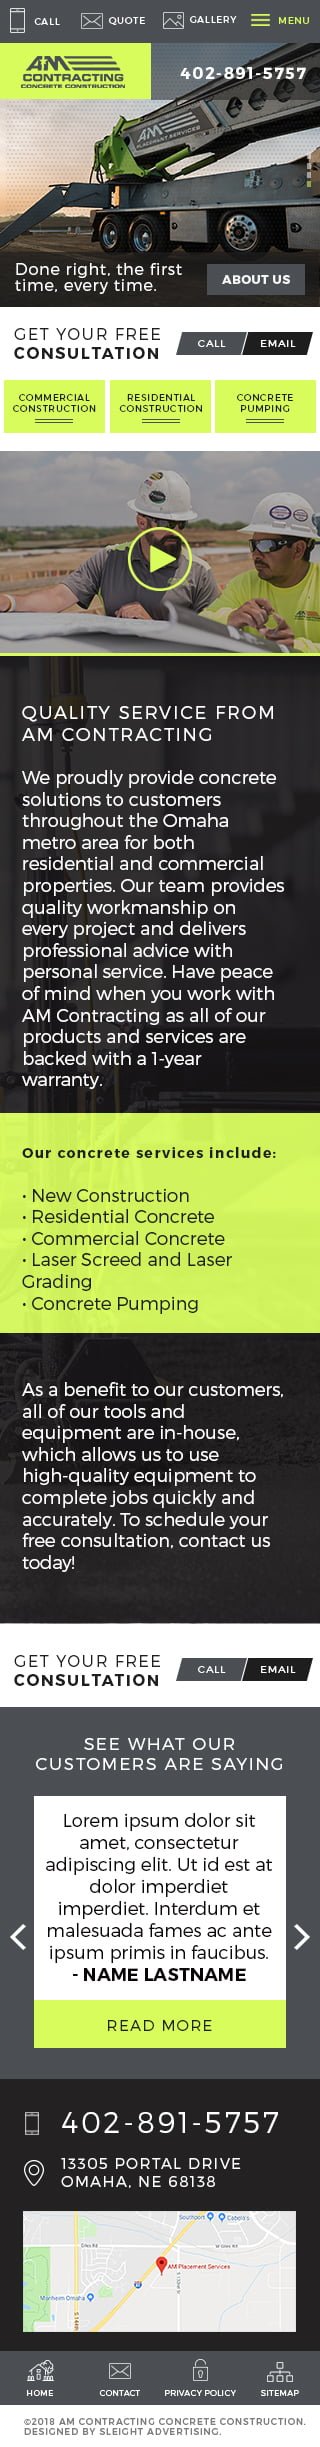 American Contracting Mobile-First Website